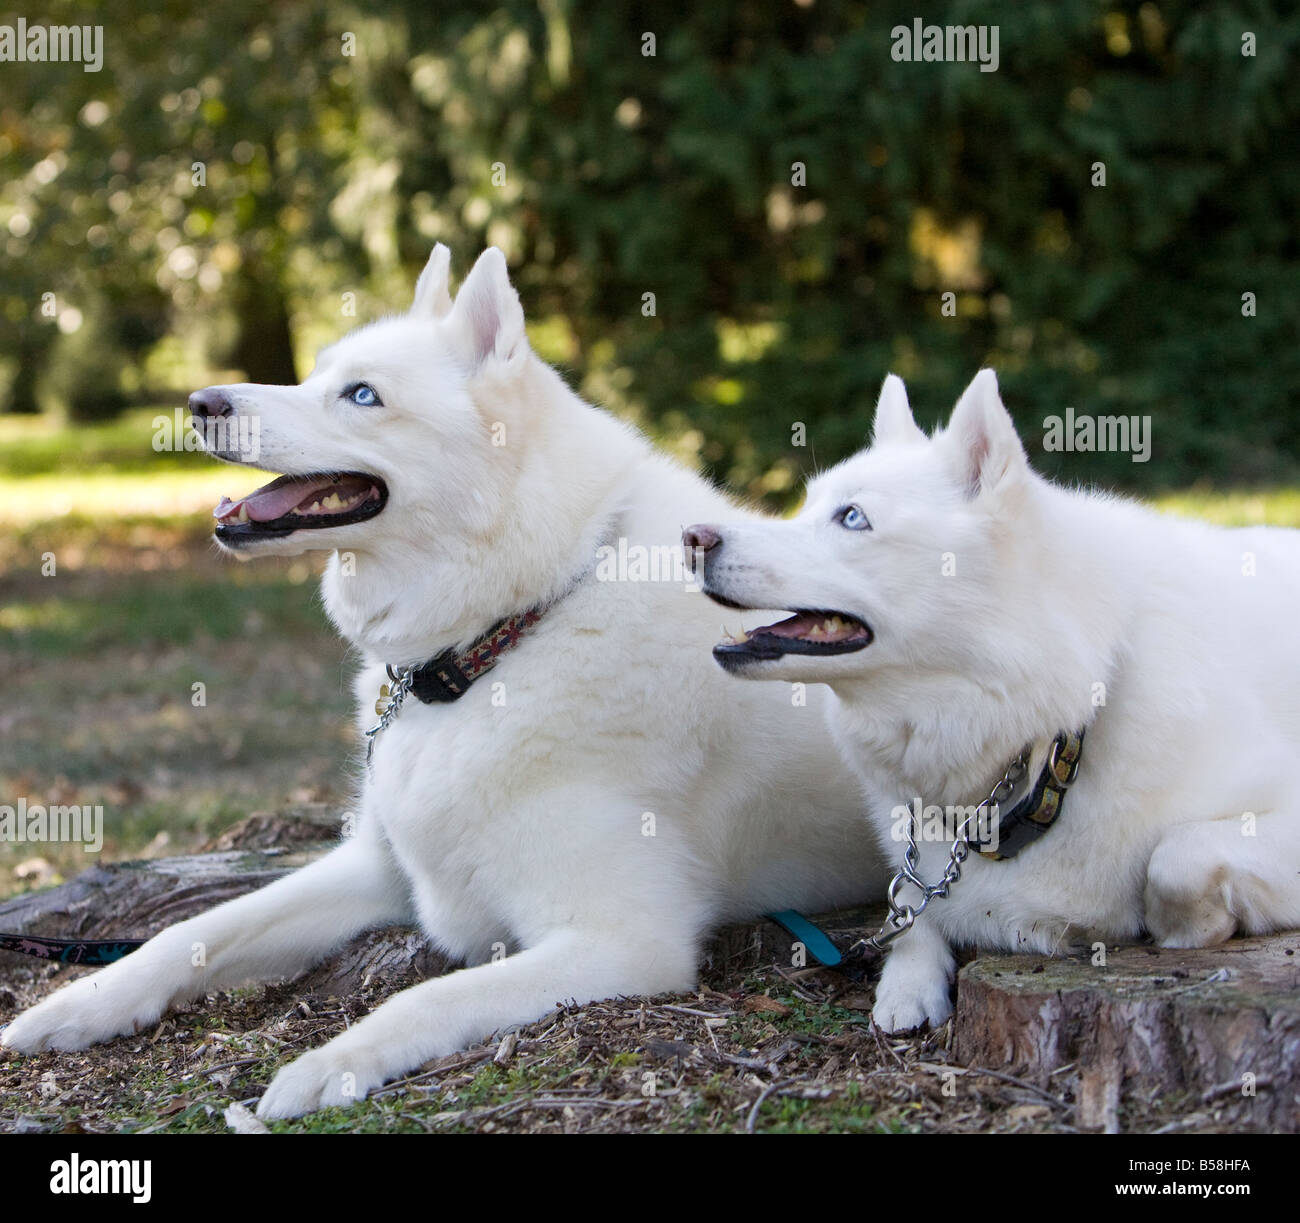 Two magnificent white huskies huskys shot in a park setting. The dogs are shot in profile and are alert with vibriant coats. Stock Photo